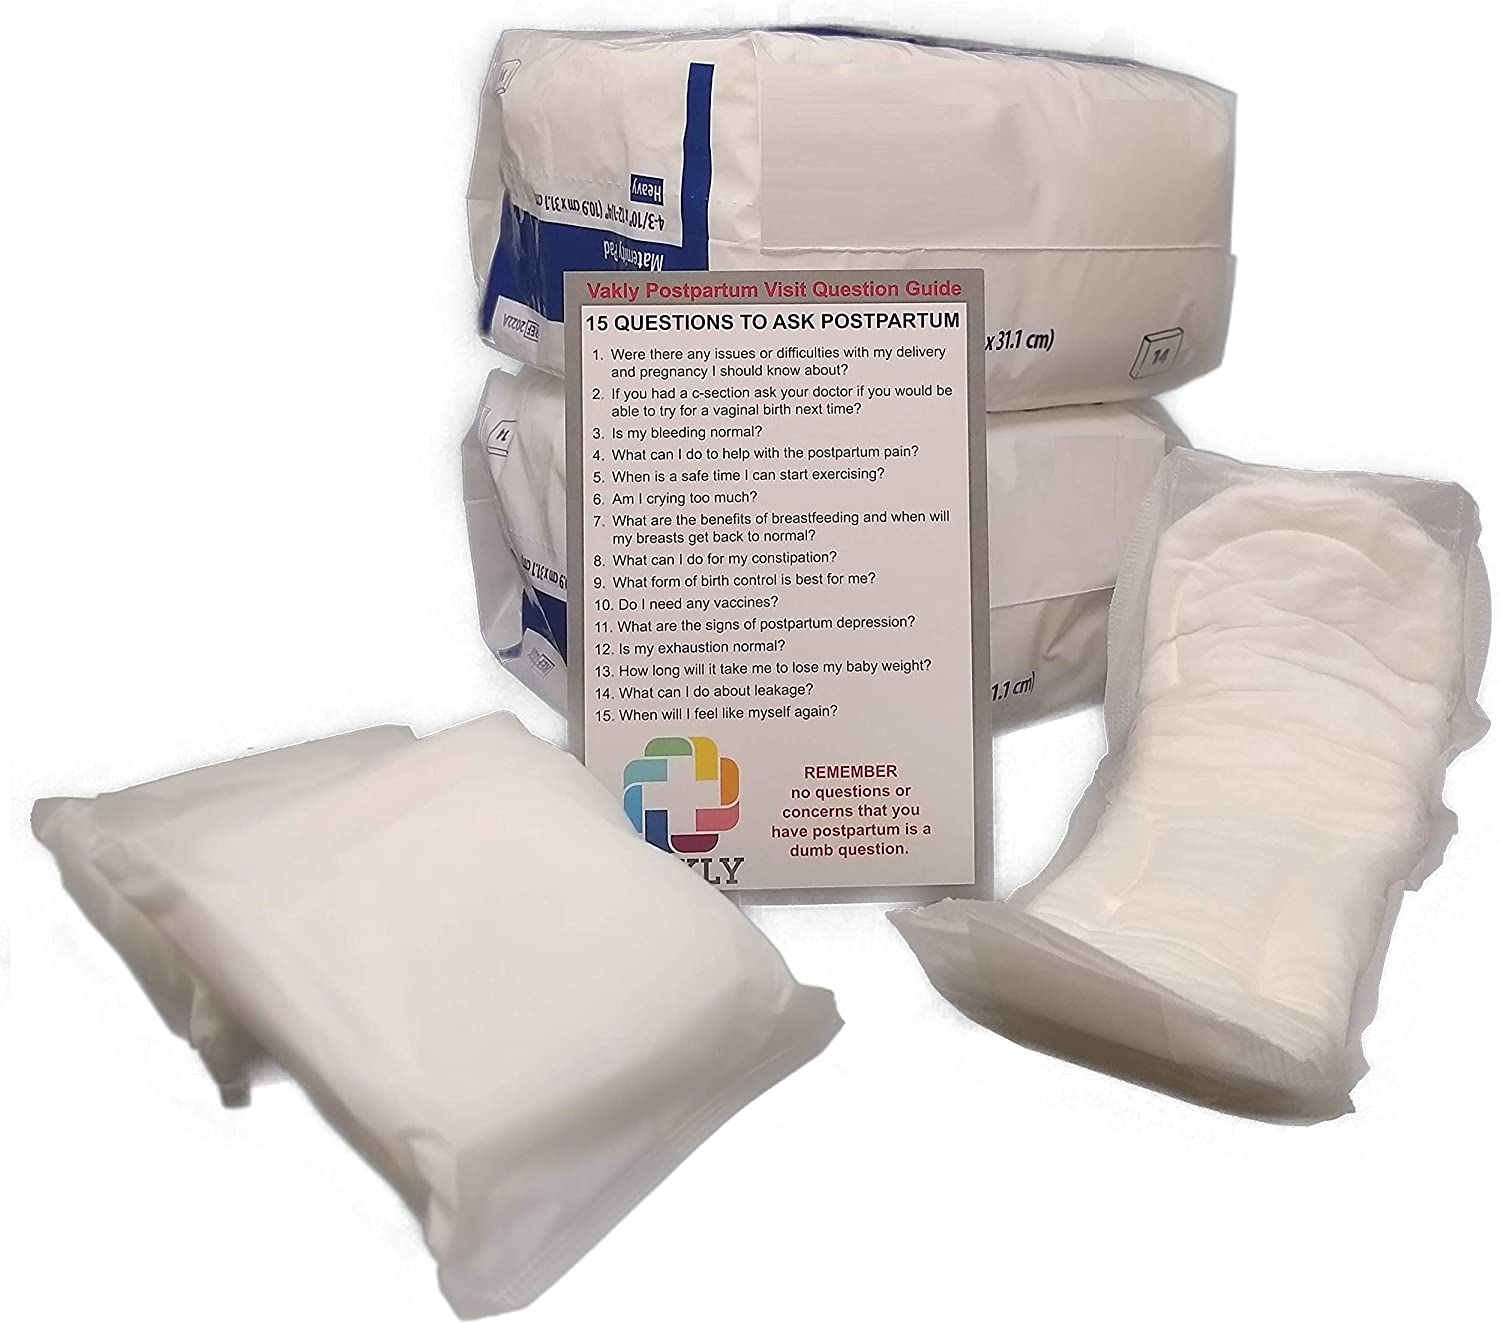 Covidien Curity Maternity Pad 4.33 x 12.25 (Bag of 14 Pads)